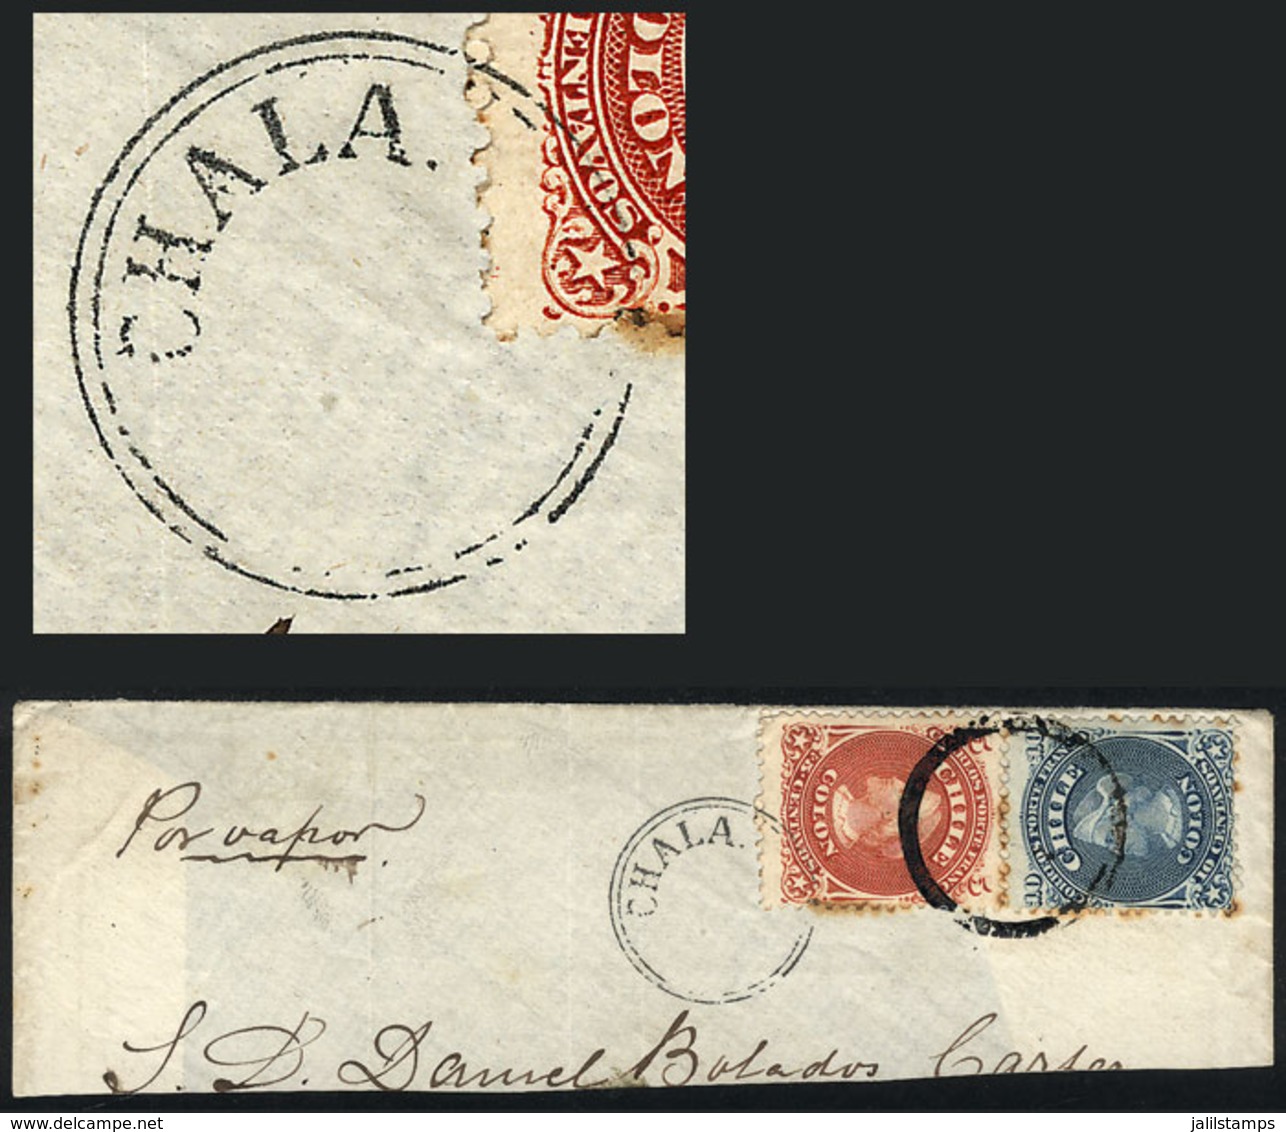 1053 CHILE: Large Fragment Of A Cover (circa 1867) Franked By Sc.17 + 18, With Cancel Of CHALA, VF Quality, Rare! - Chile